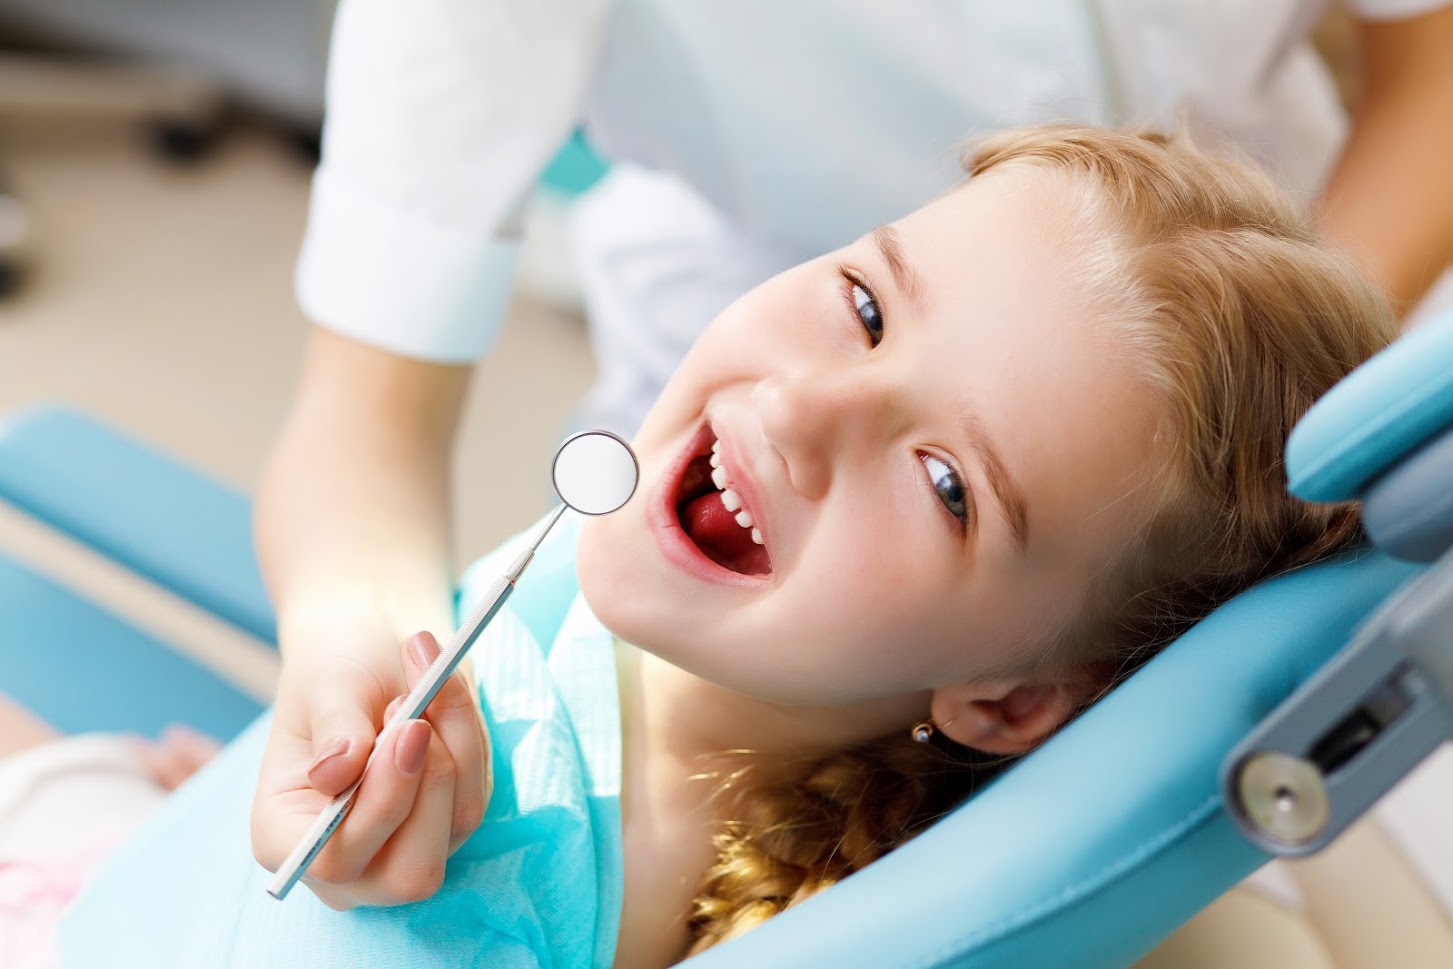 This is the image for the news article titled Common Dental Issues Found in Young Children